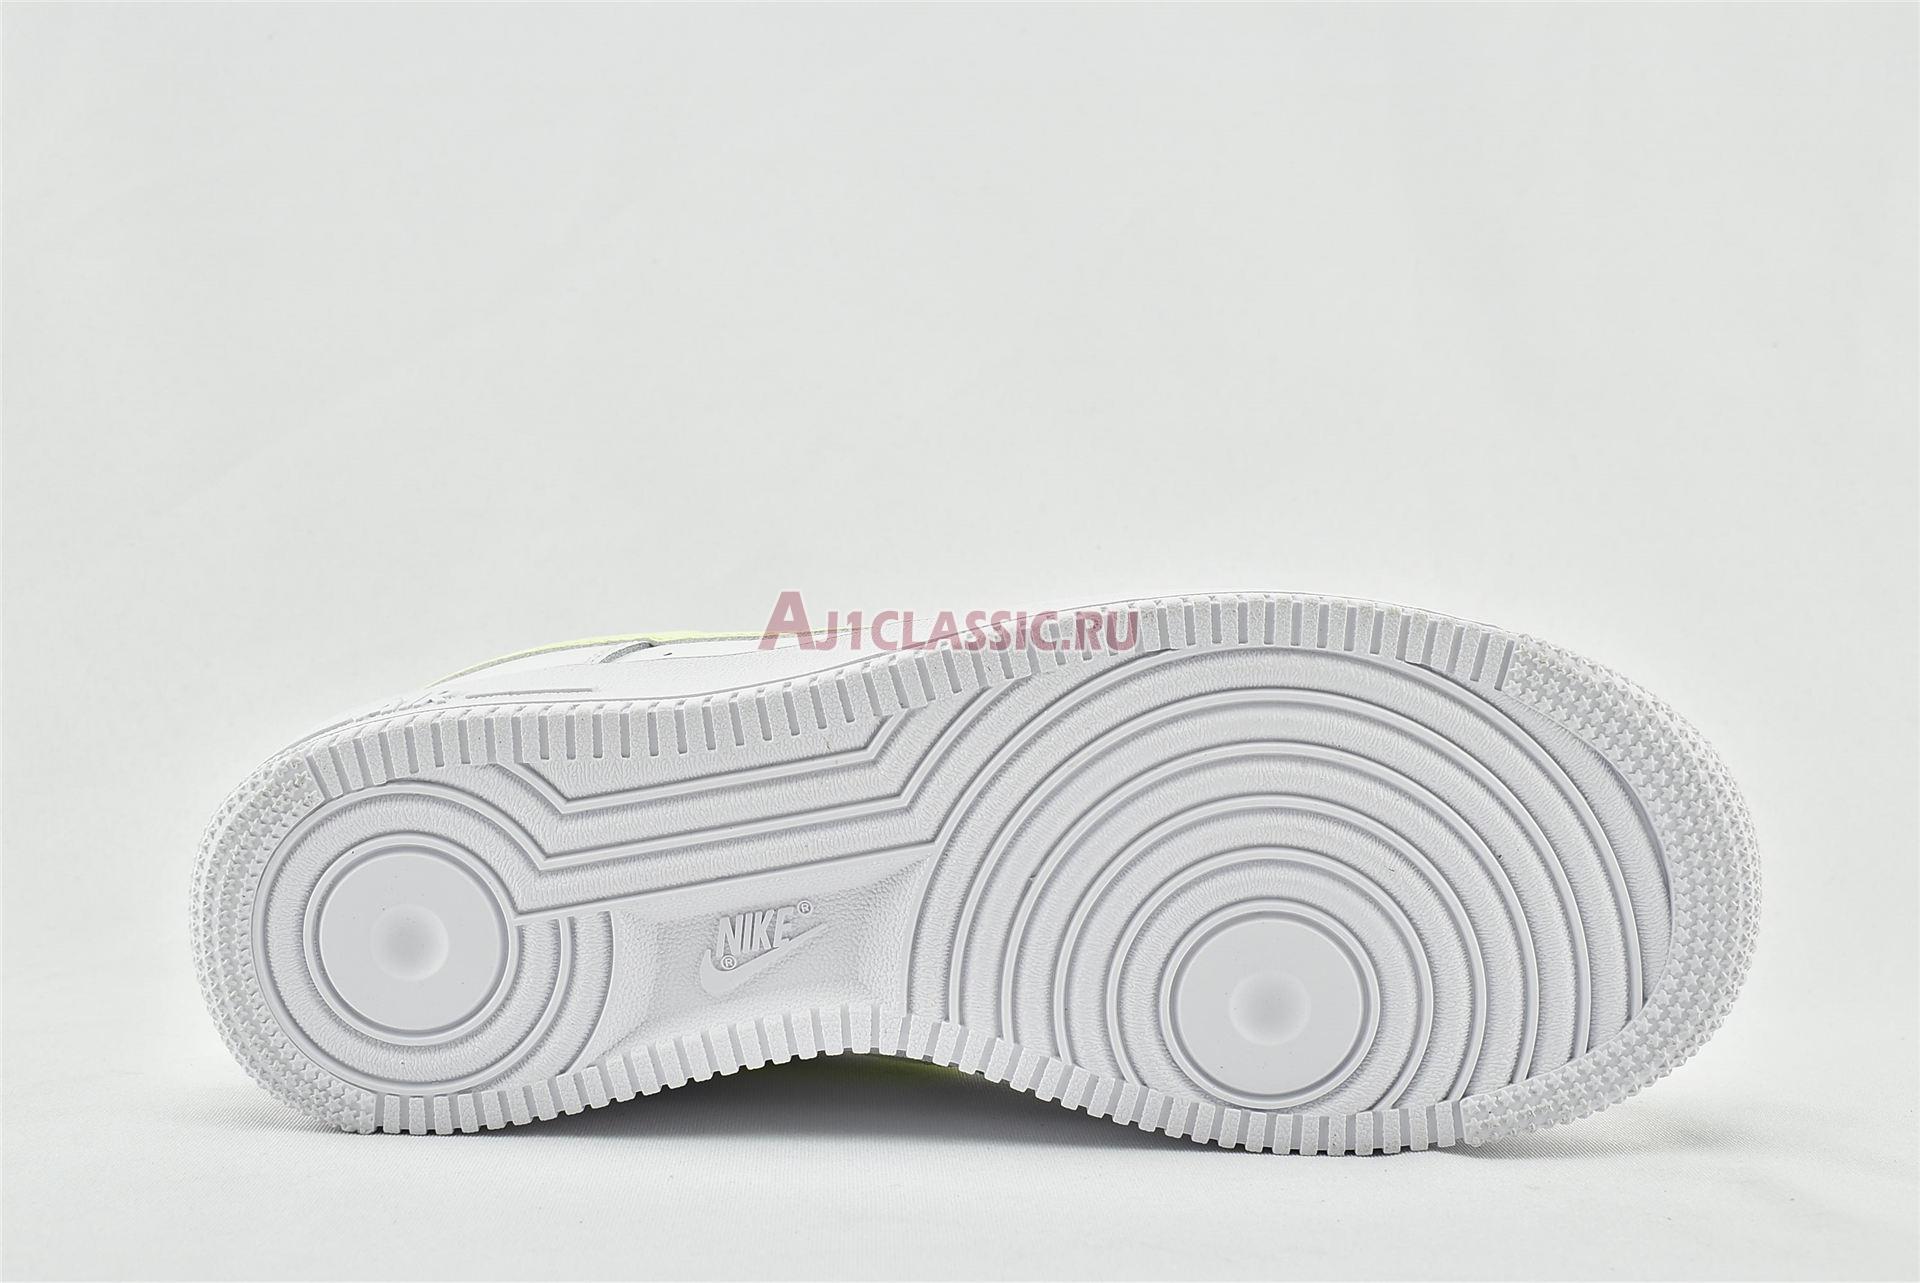 Nike Air Force 1 Low "Barely Volt" 315115-155